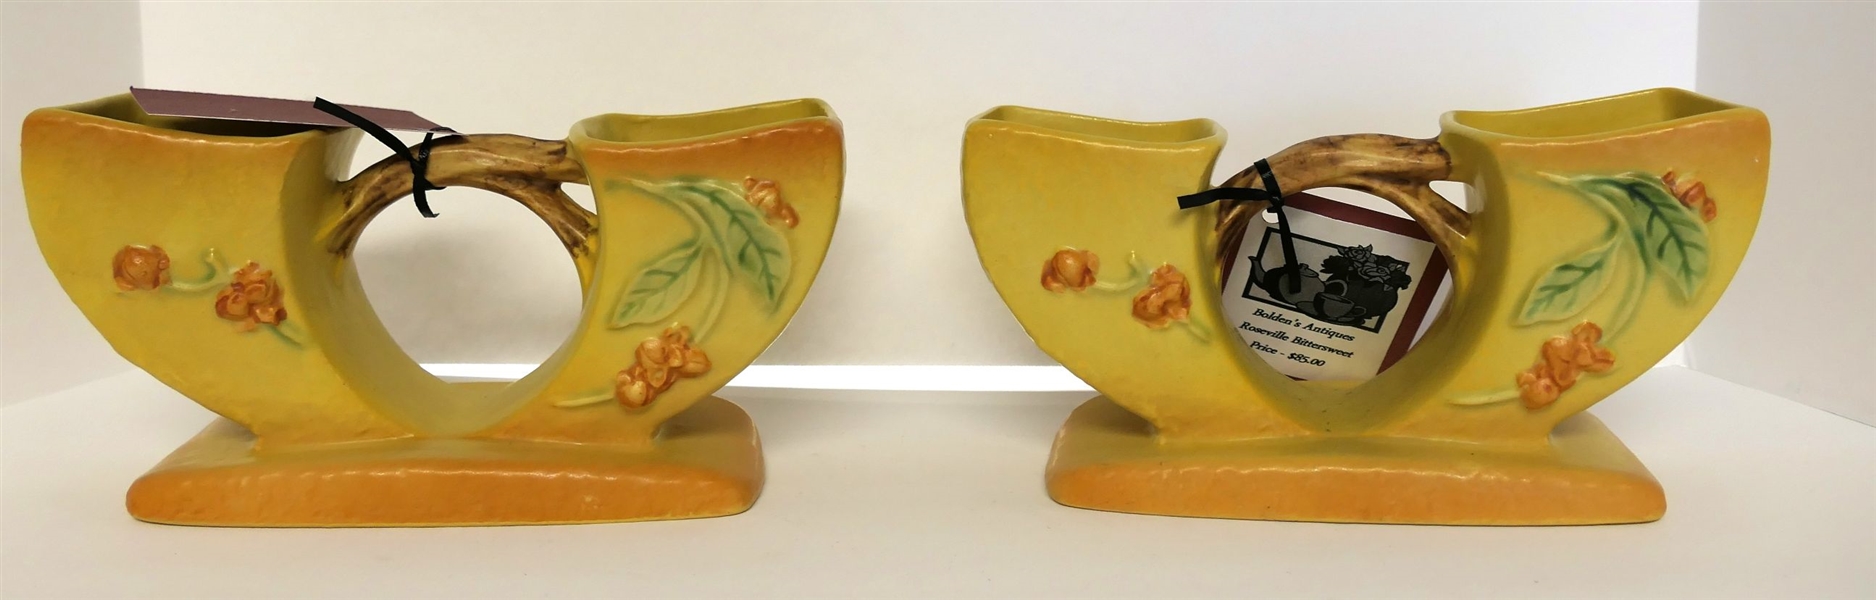 Pair of Roseville Bittersweet Vases  - Number 858 - Measuring 4" Tall 8 1/2" by 3"